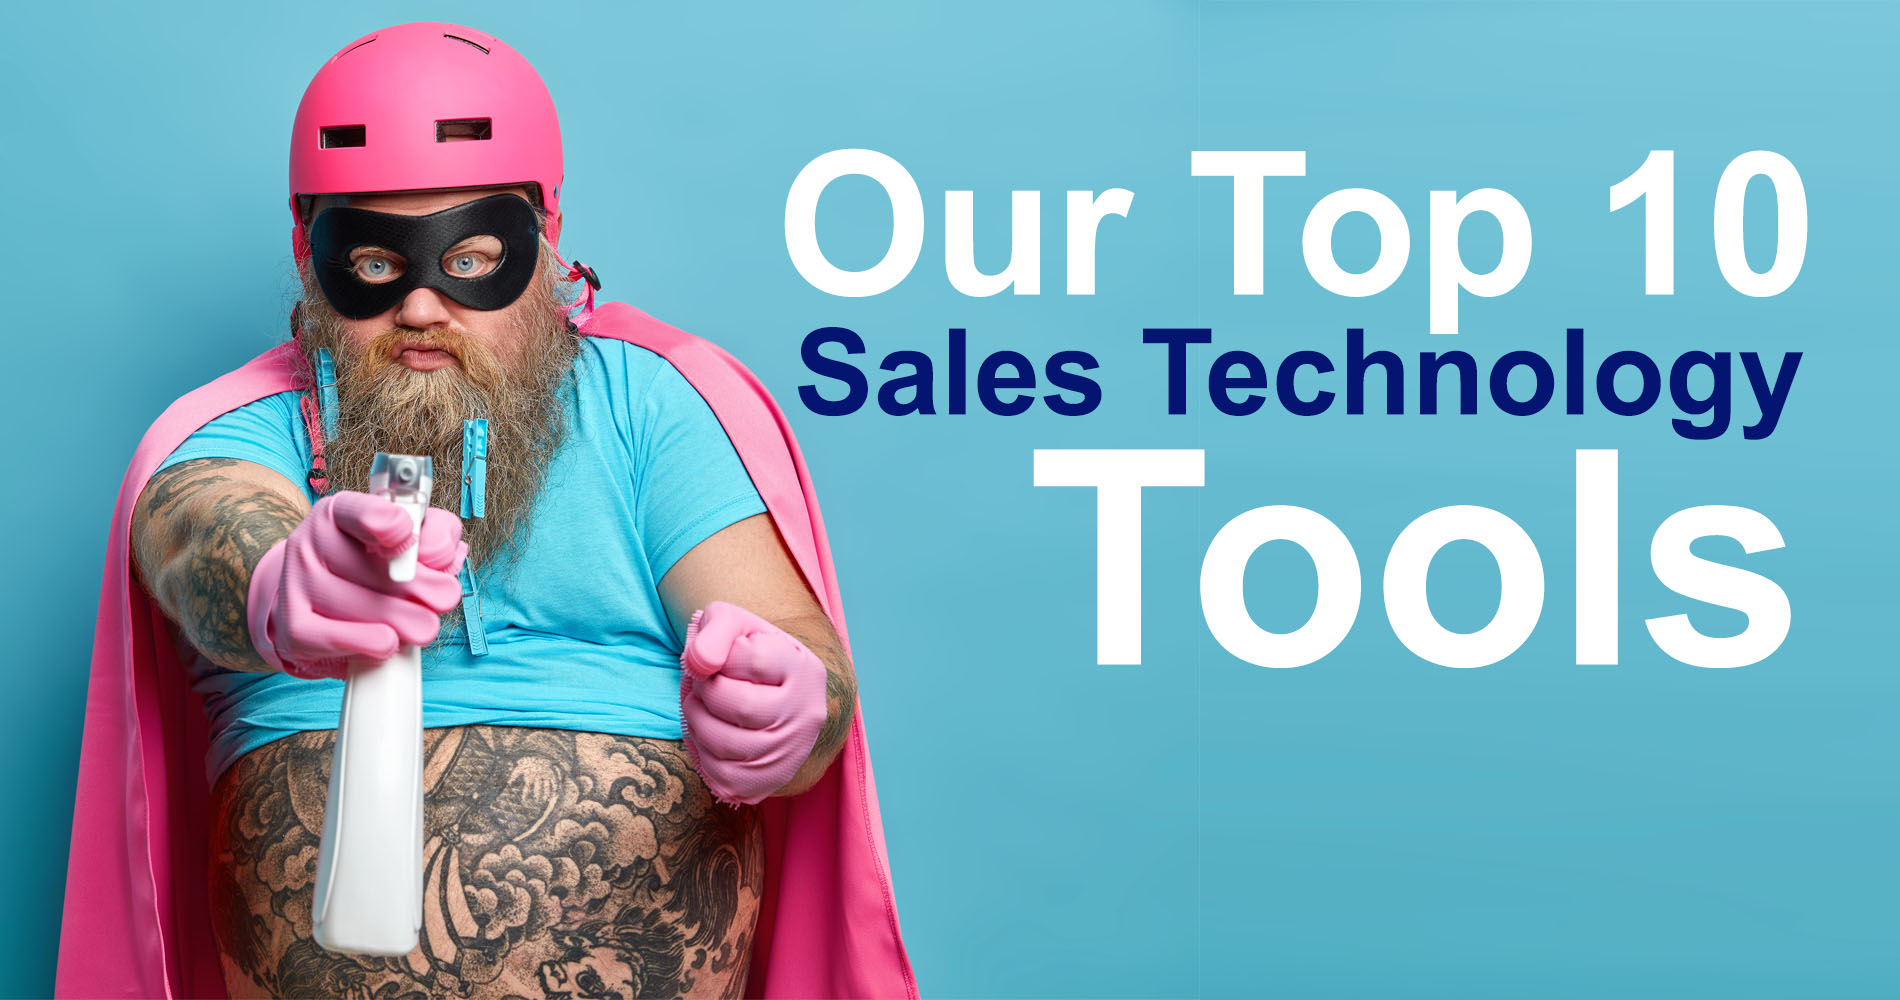 Our Top 10 Sales Technology Tools